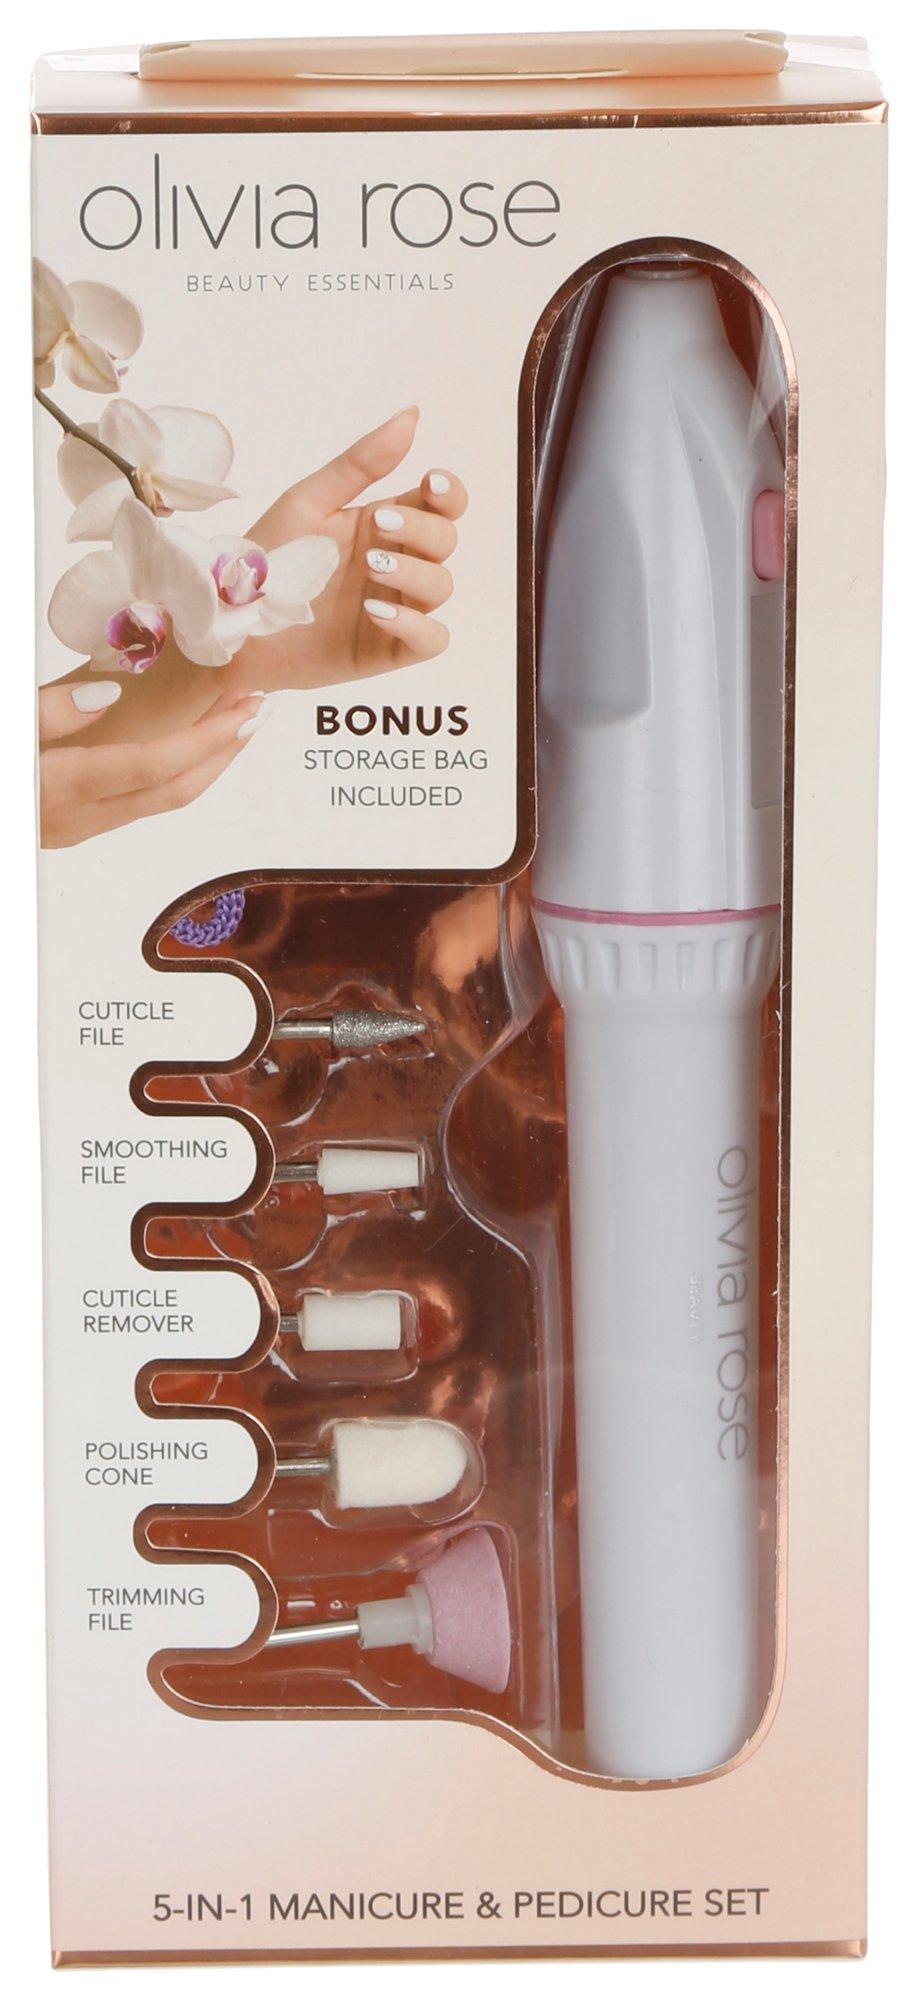 Equate Beauty Total Nail Care System 